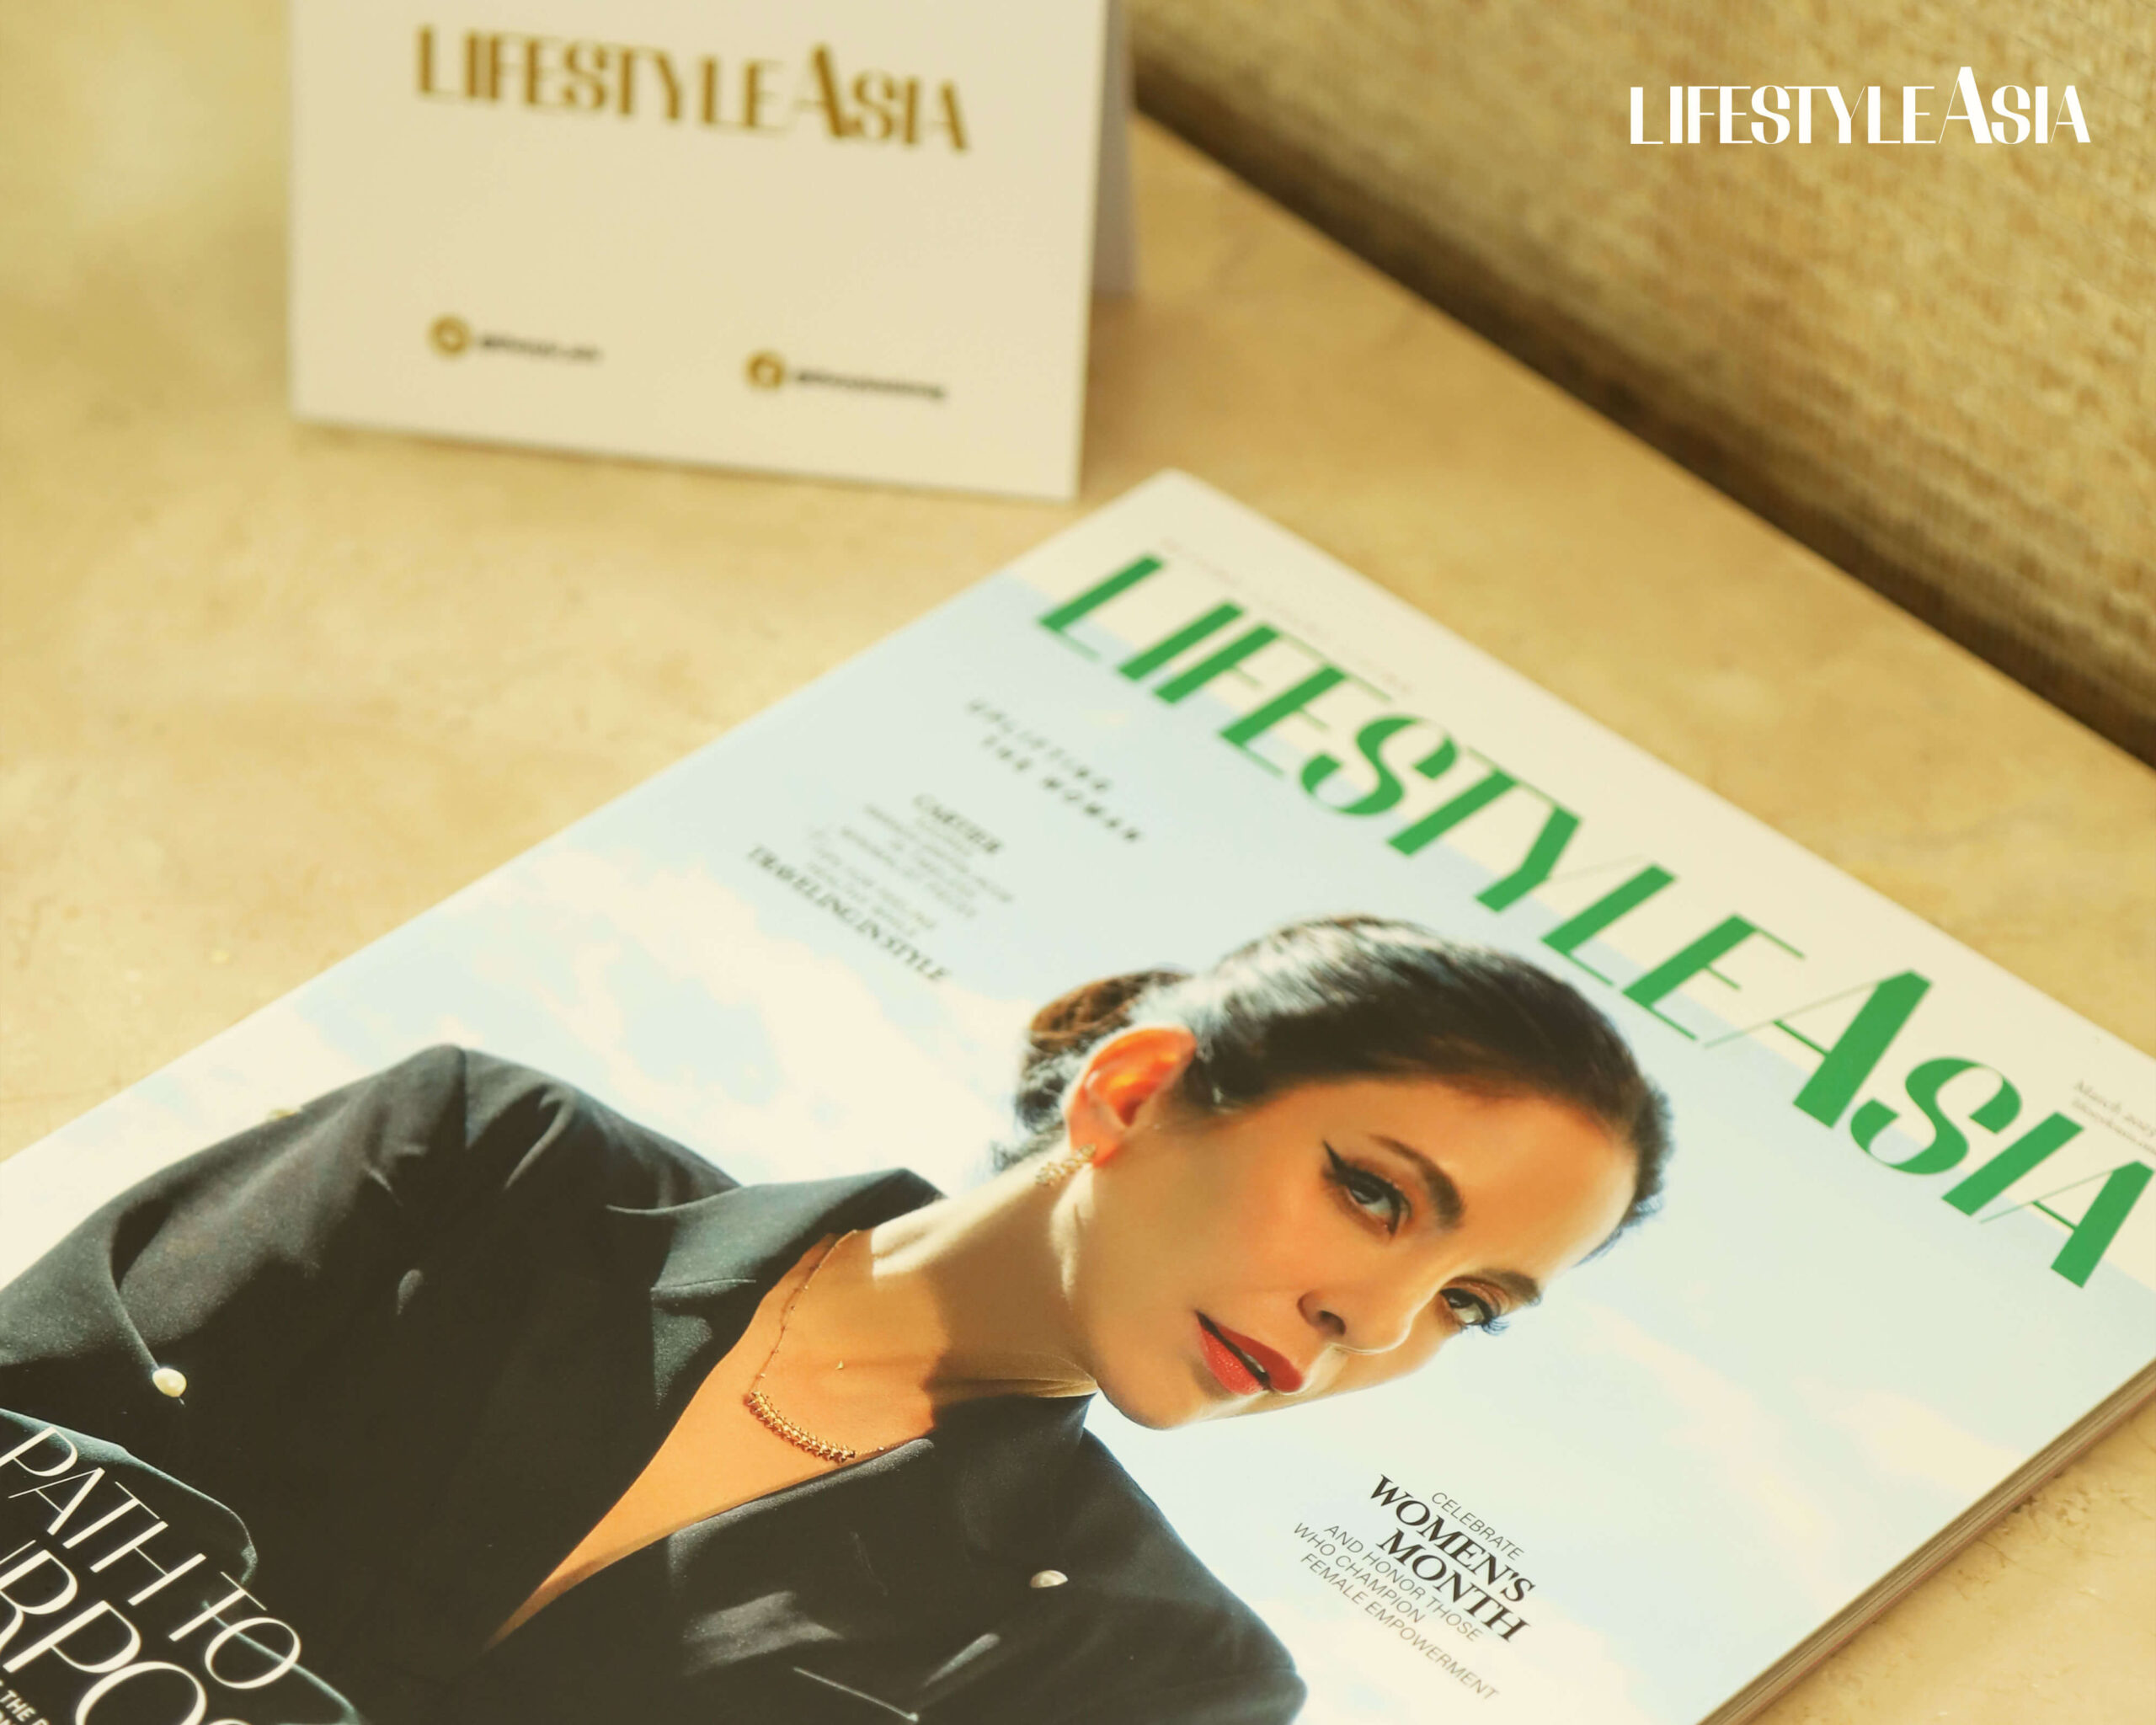 Lifestyle Asia's March issue